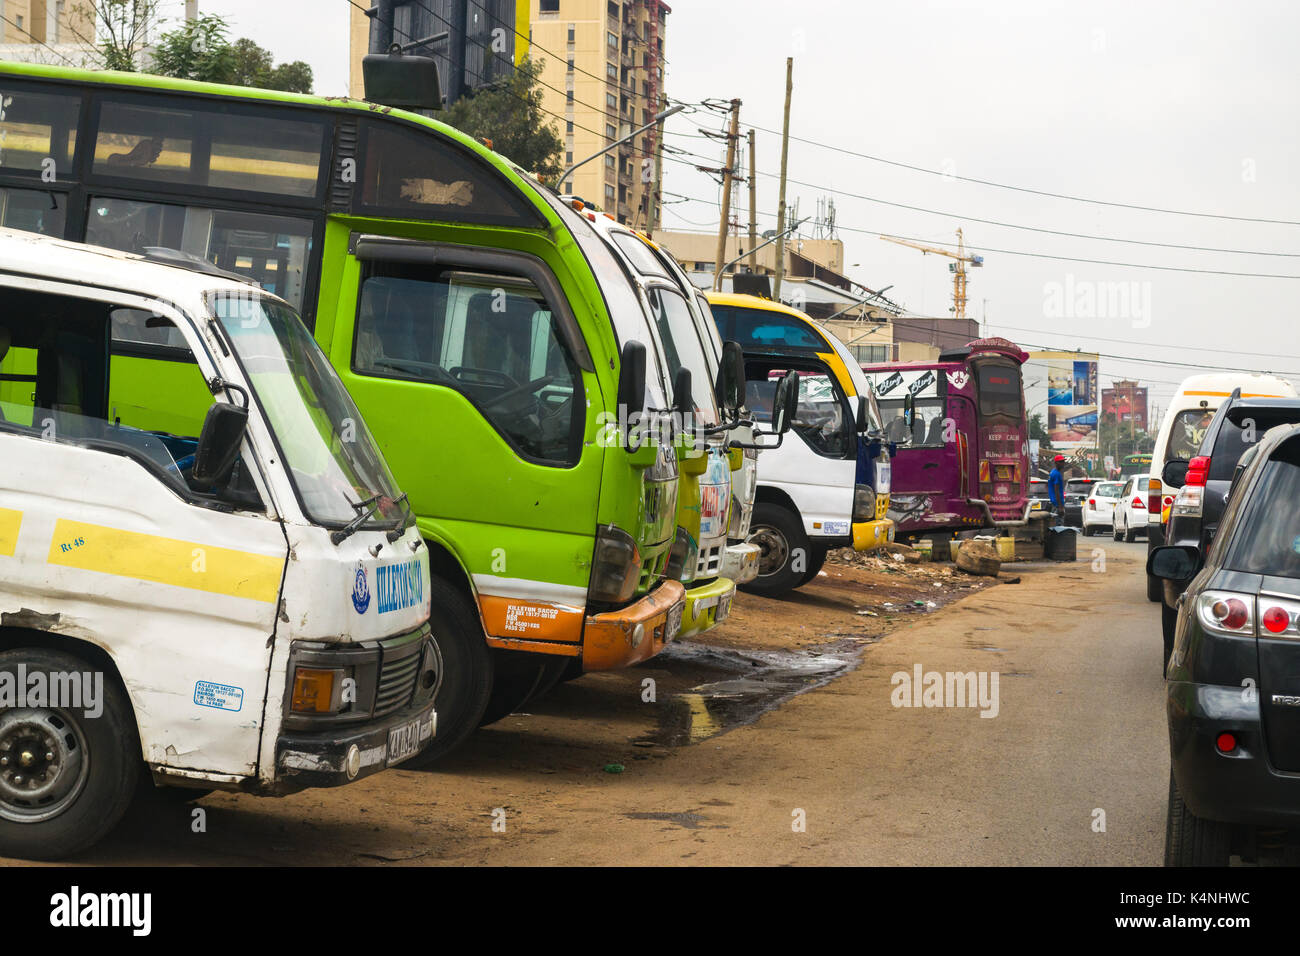 Buses and matatus on side of the road after being washed and cleaned, Nairobi, Kenya Stock Photo